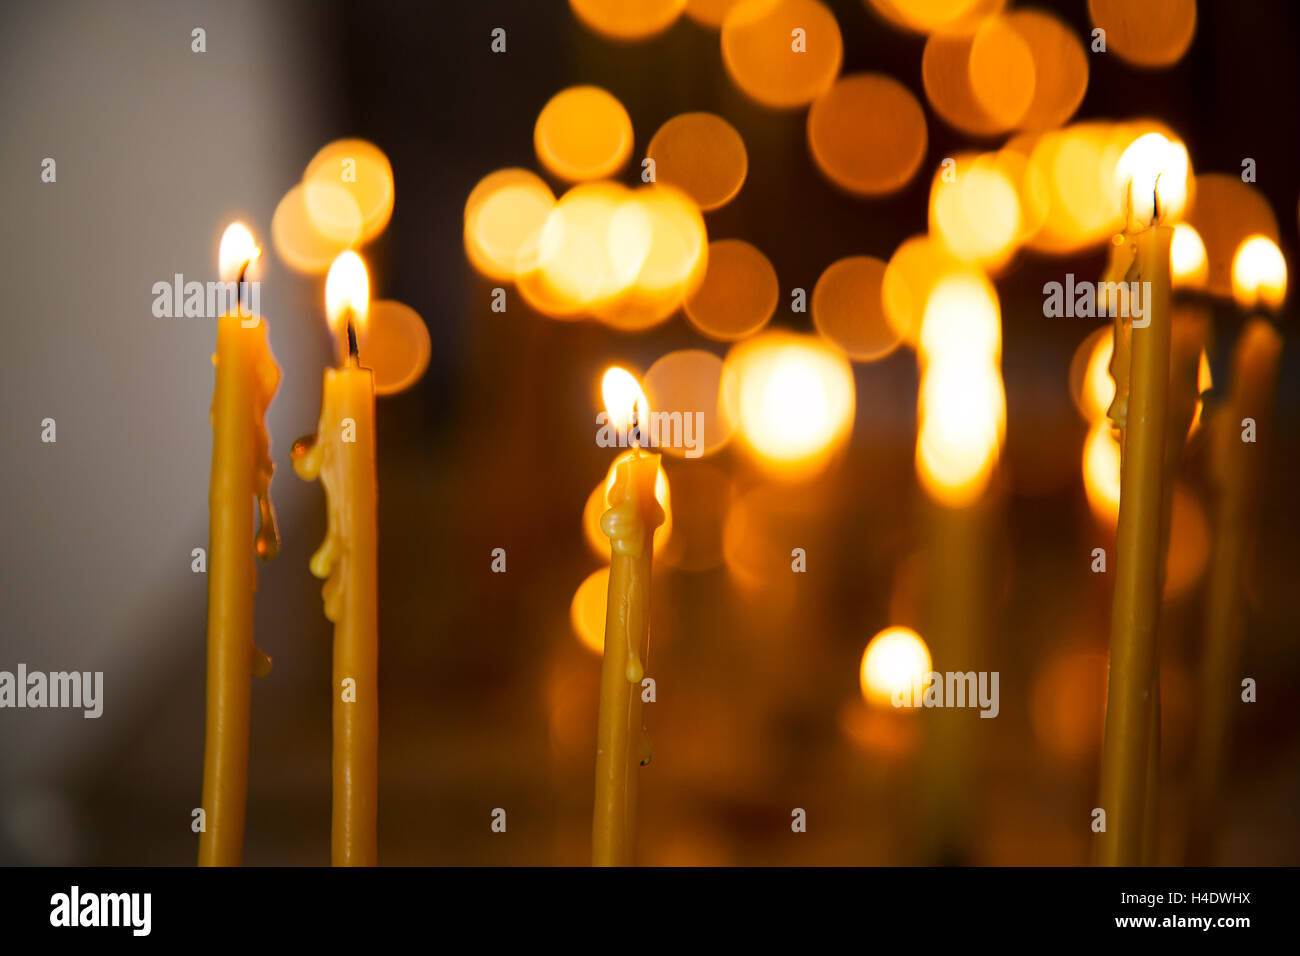 Candle in front of many defocused candleflames creating a spiritual atmosphere and in remembrance of loved ones Stock Photo